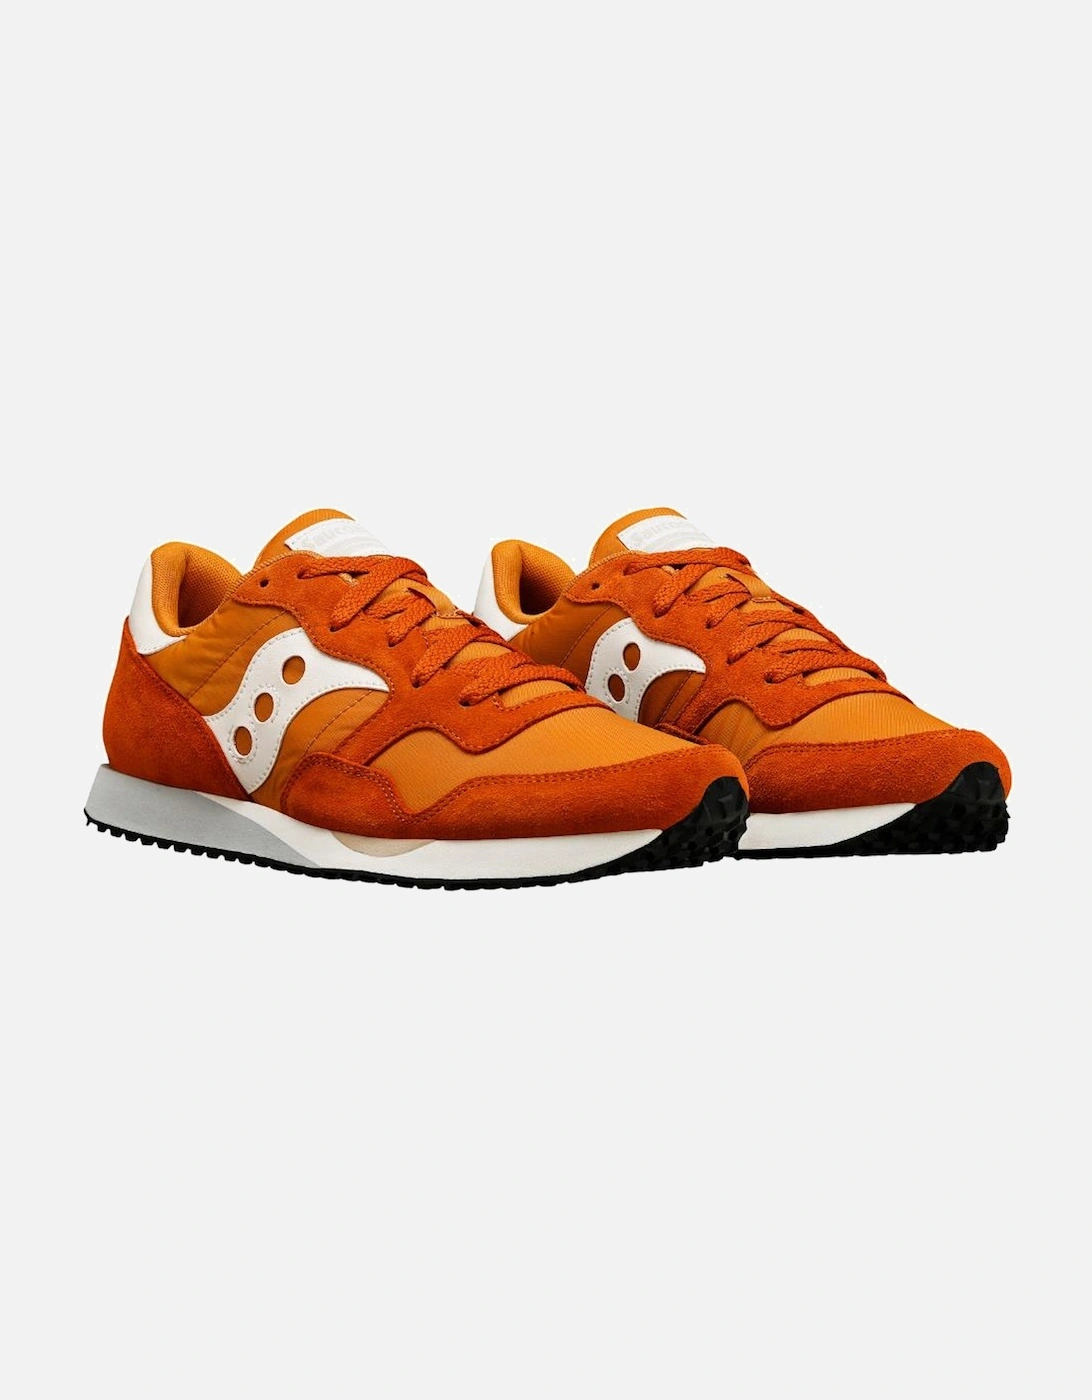 DXN Trainer - Rust/Off White